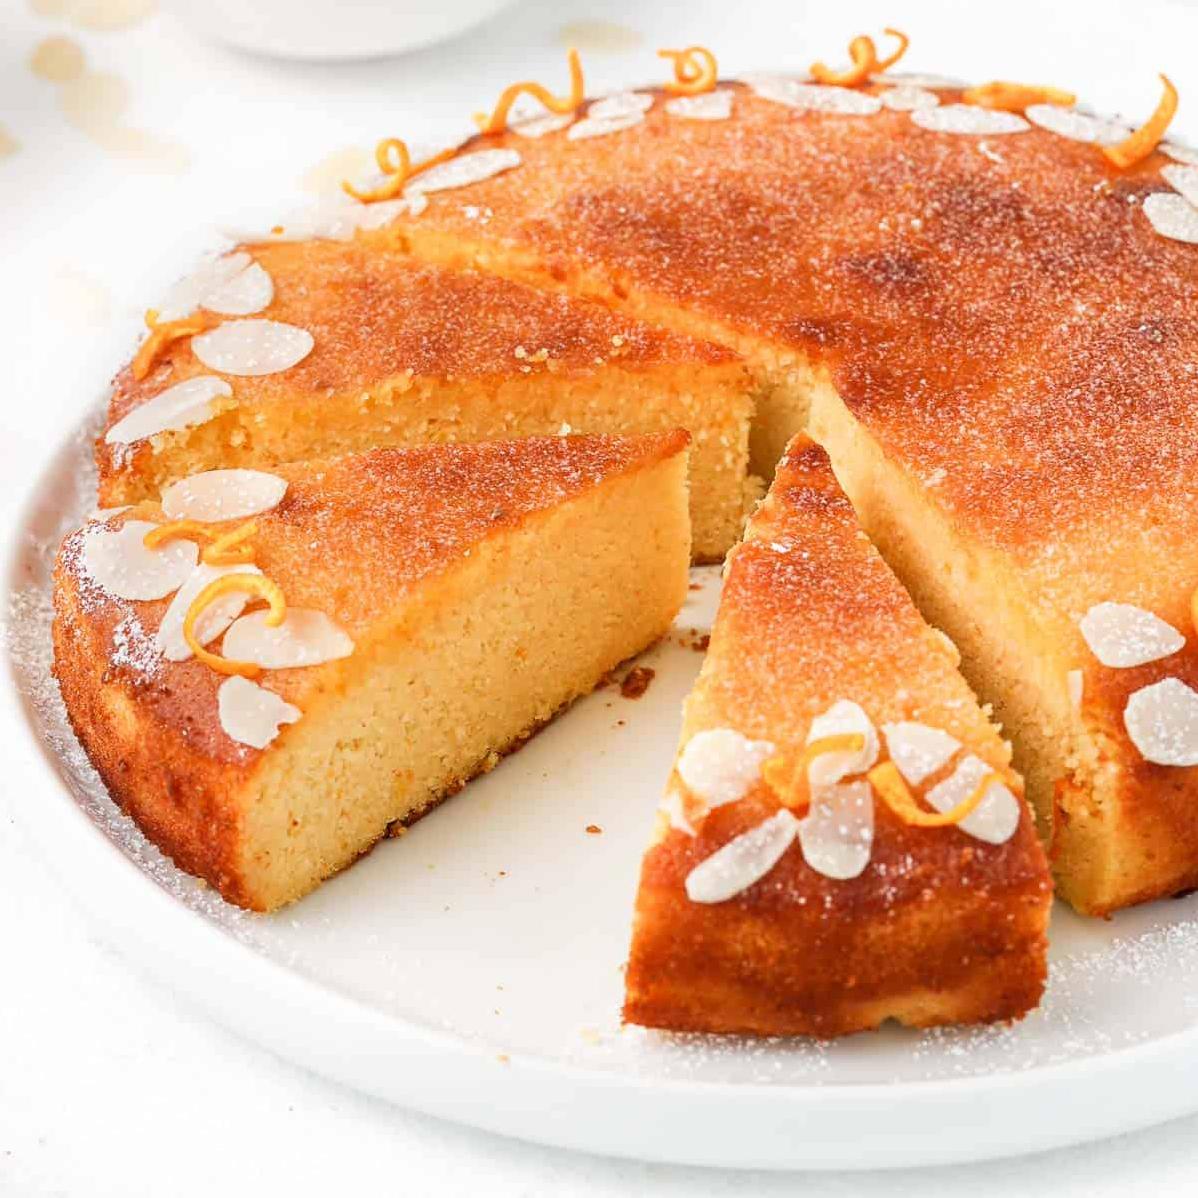  Indulge in a guilt-free dessert with this gluten-free and dairy-free Orange and Almond Cake